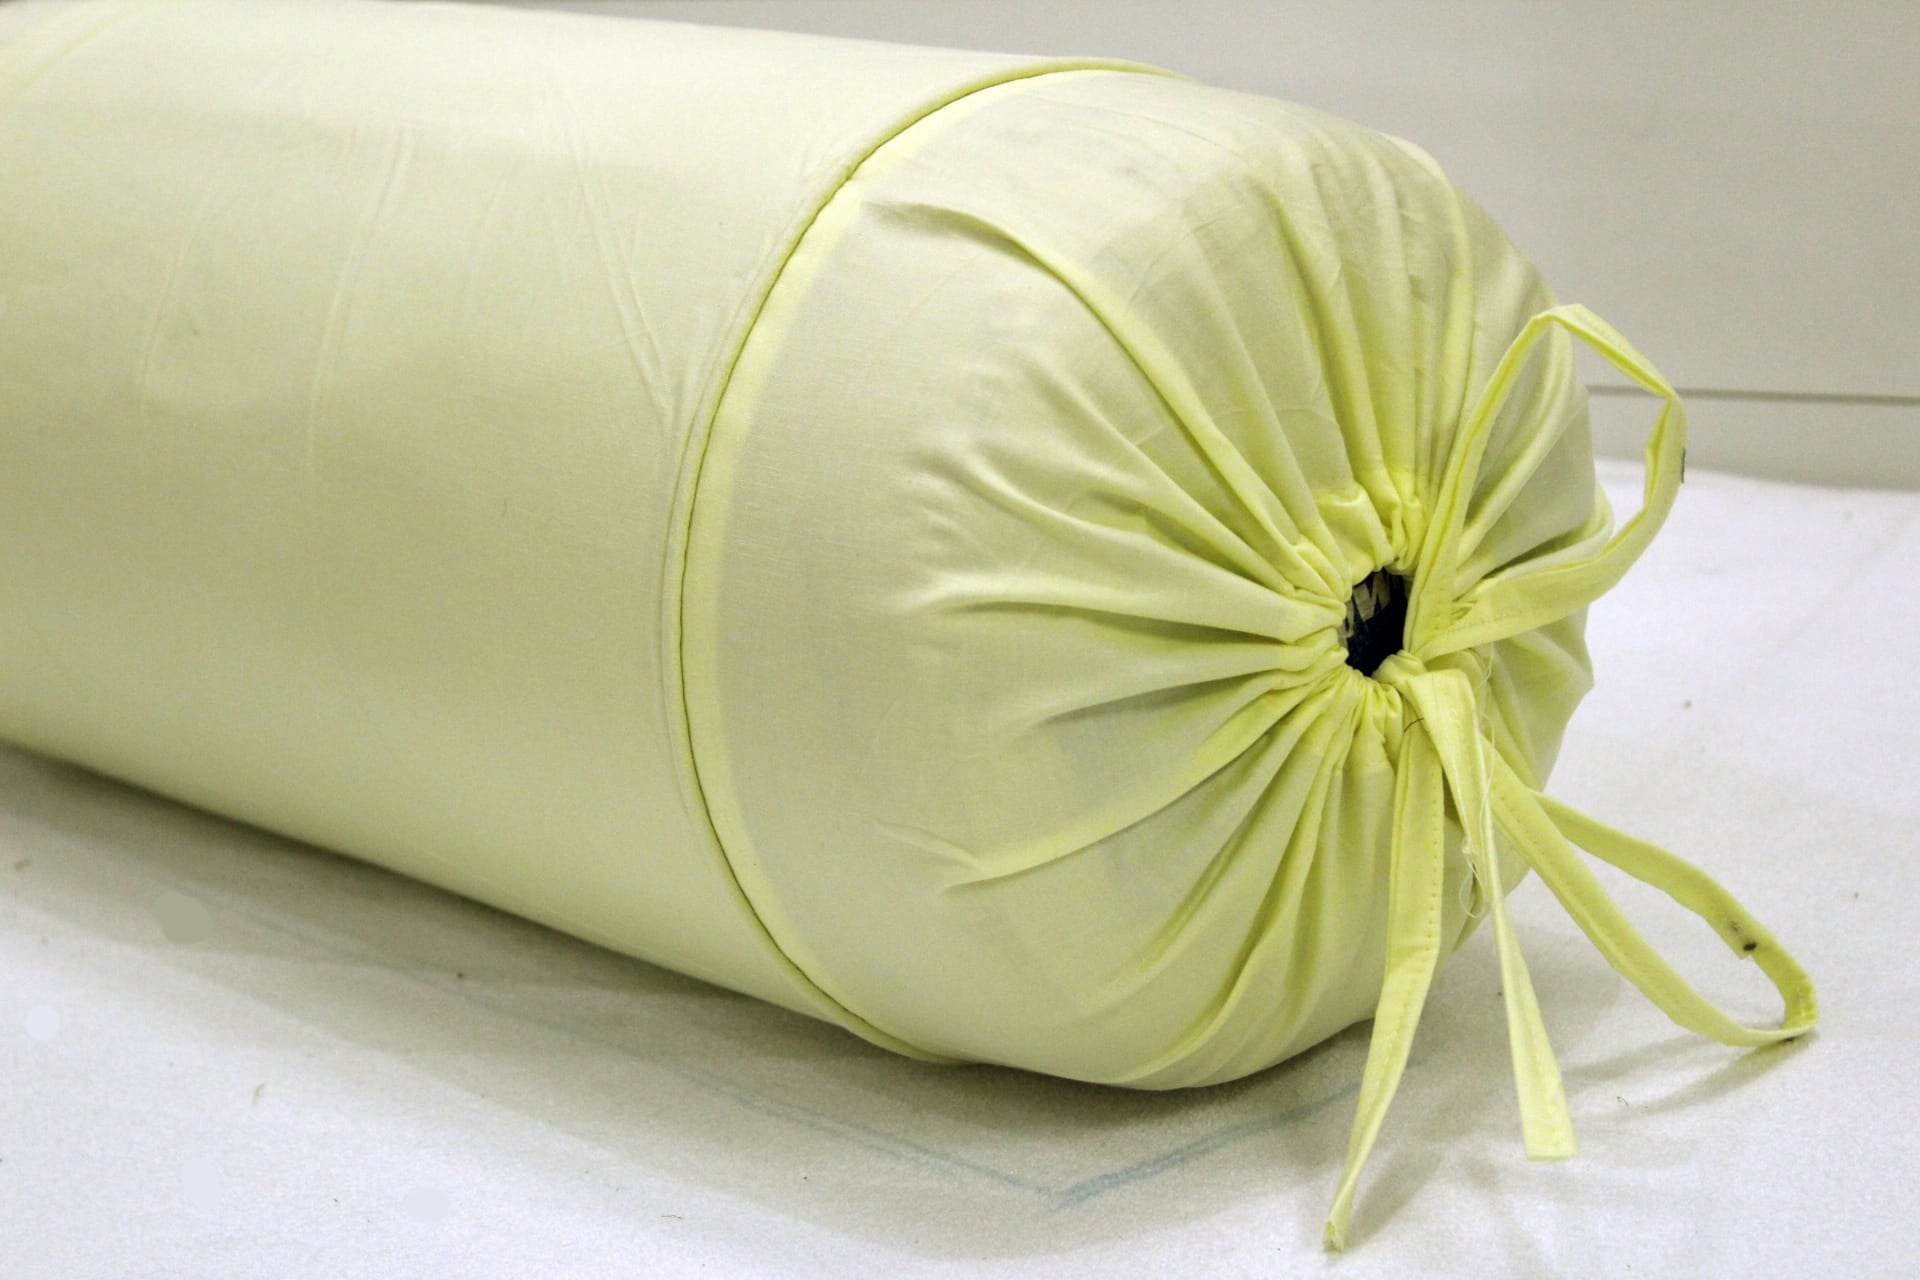 Soft Plain Cotton Bolster Cover Set 2Pcs in Light Yellow online at best prices